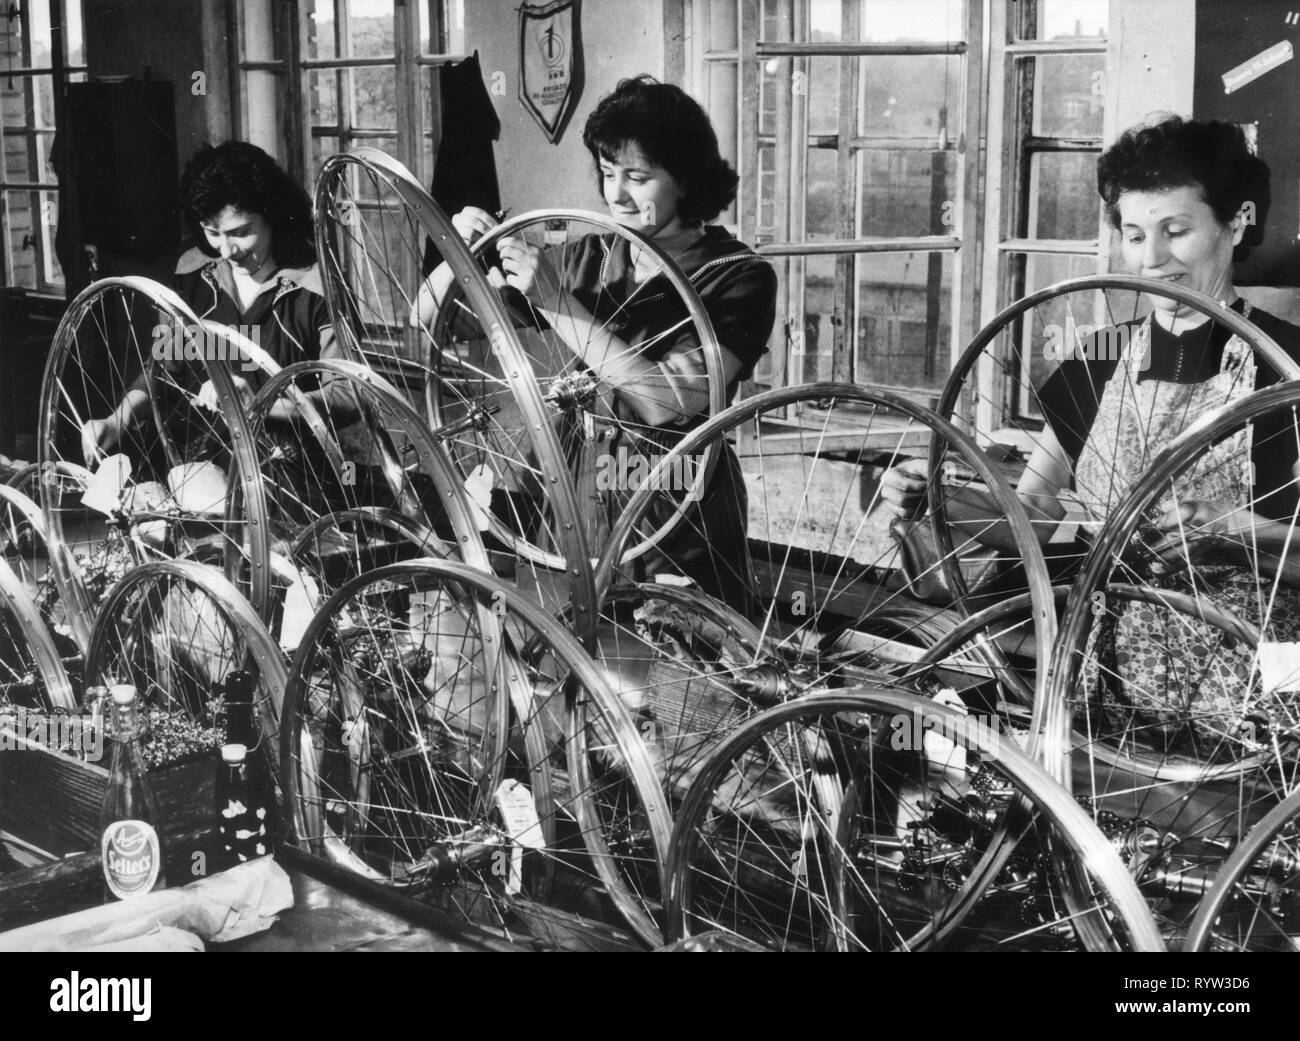 transport / transportation, bicycles, bicycle factory, Elite Diamant manufactory, Karl-Marx-Stadt, (Karl Marx City), (today: Chemnitz), East-Germany, GDR, 14.4.1961, Additional-Rights-Clearance-Info-Not-Available Stock Photo